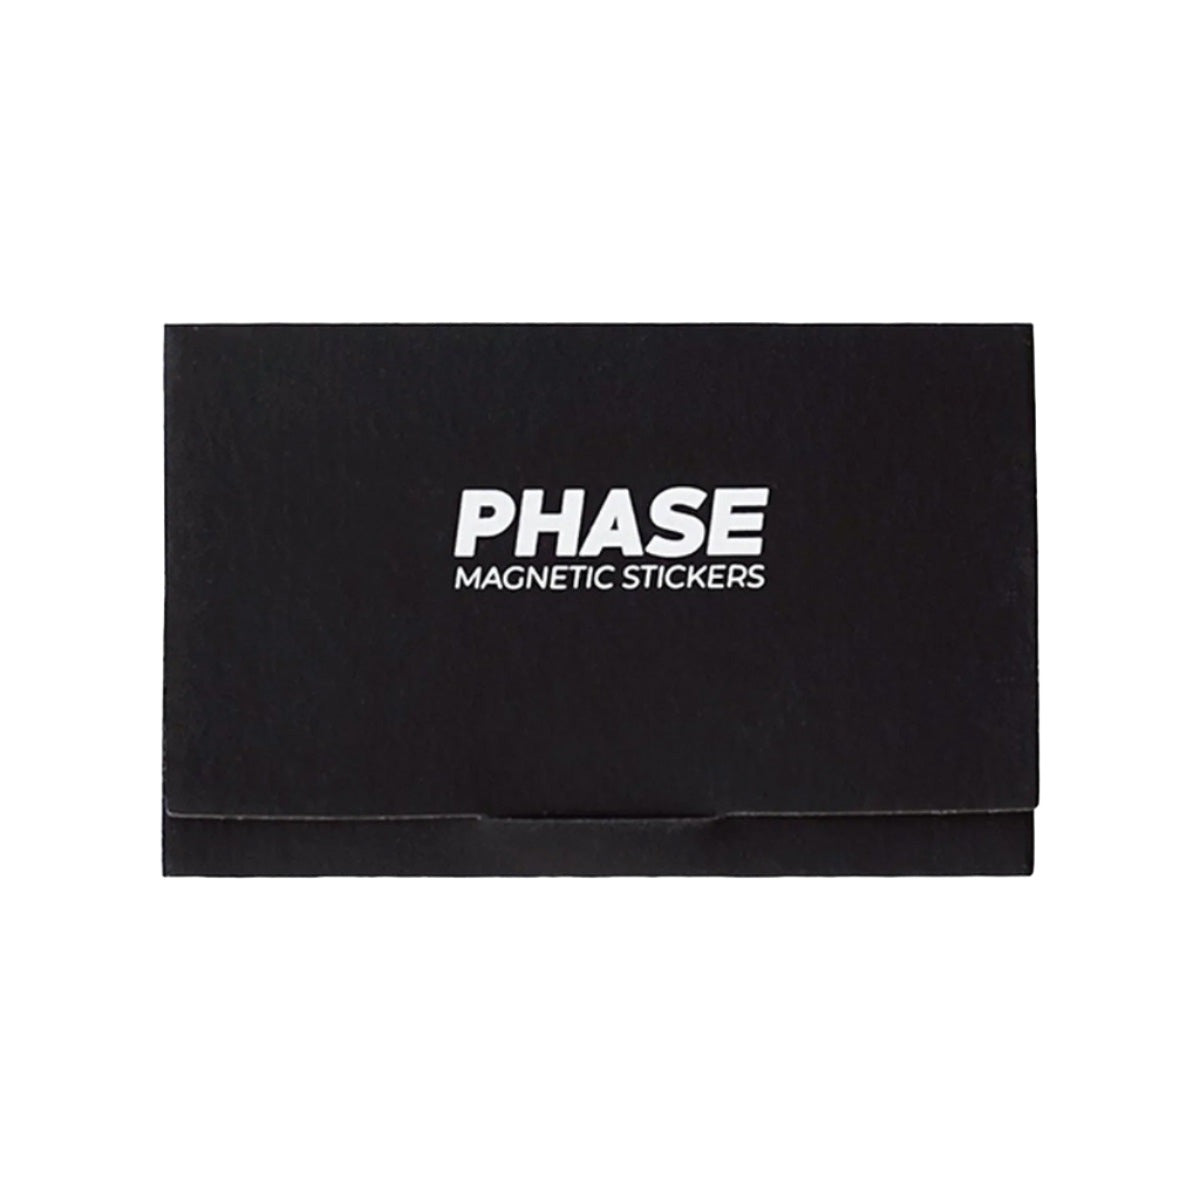 Phase Magnetic Stickers